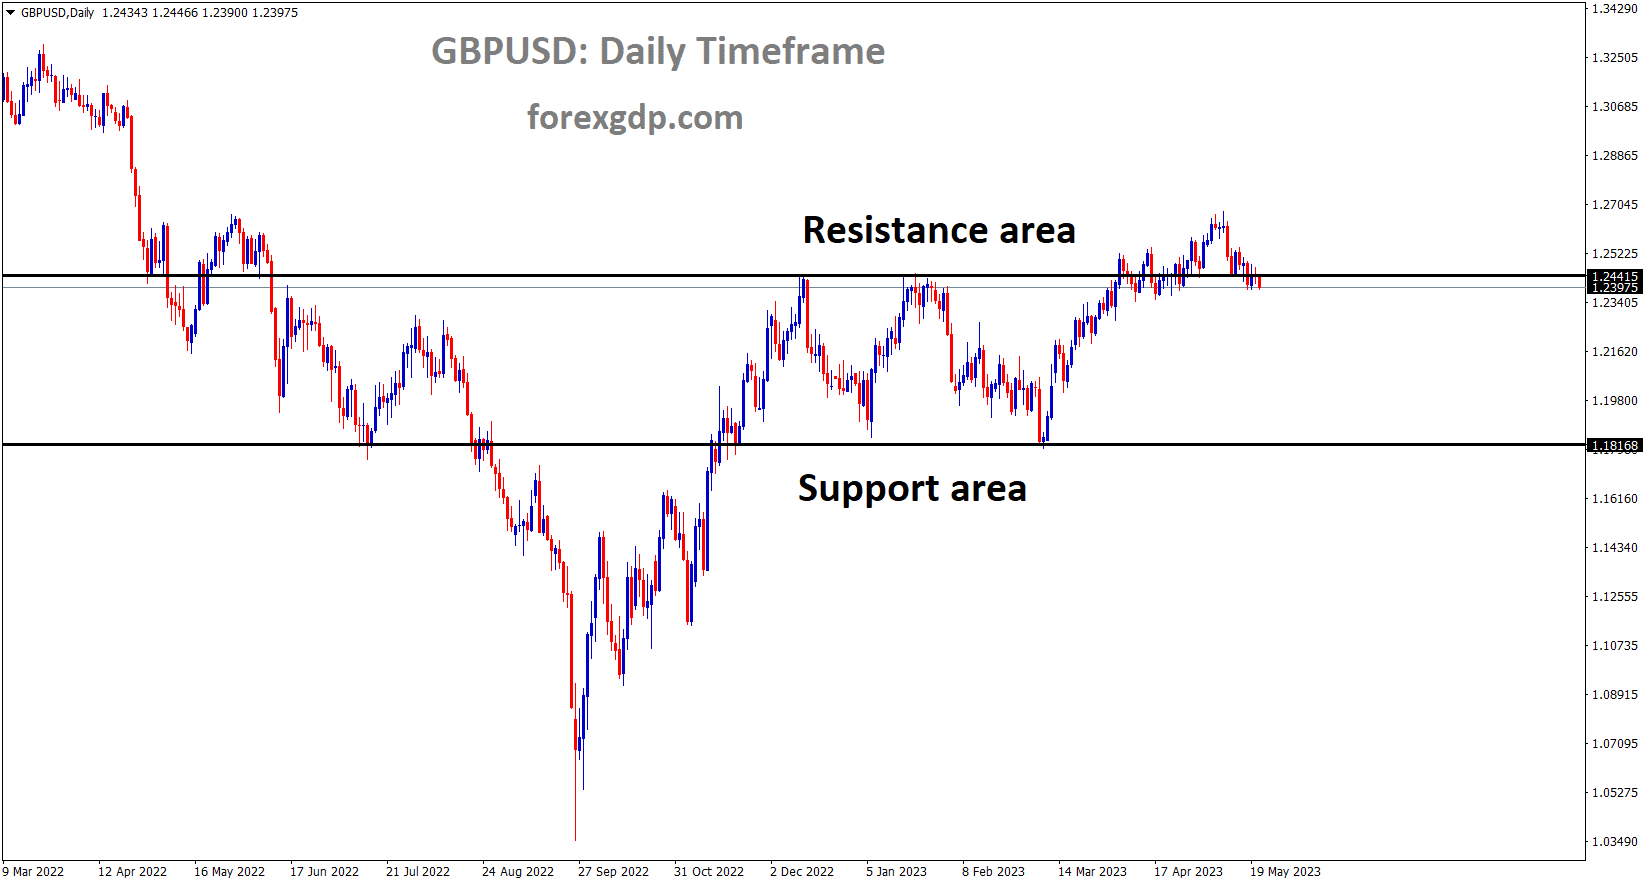 GBPUSD is moving in the Box pattern and the market has fallen from the resistance area of the pattern